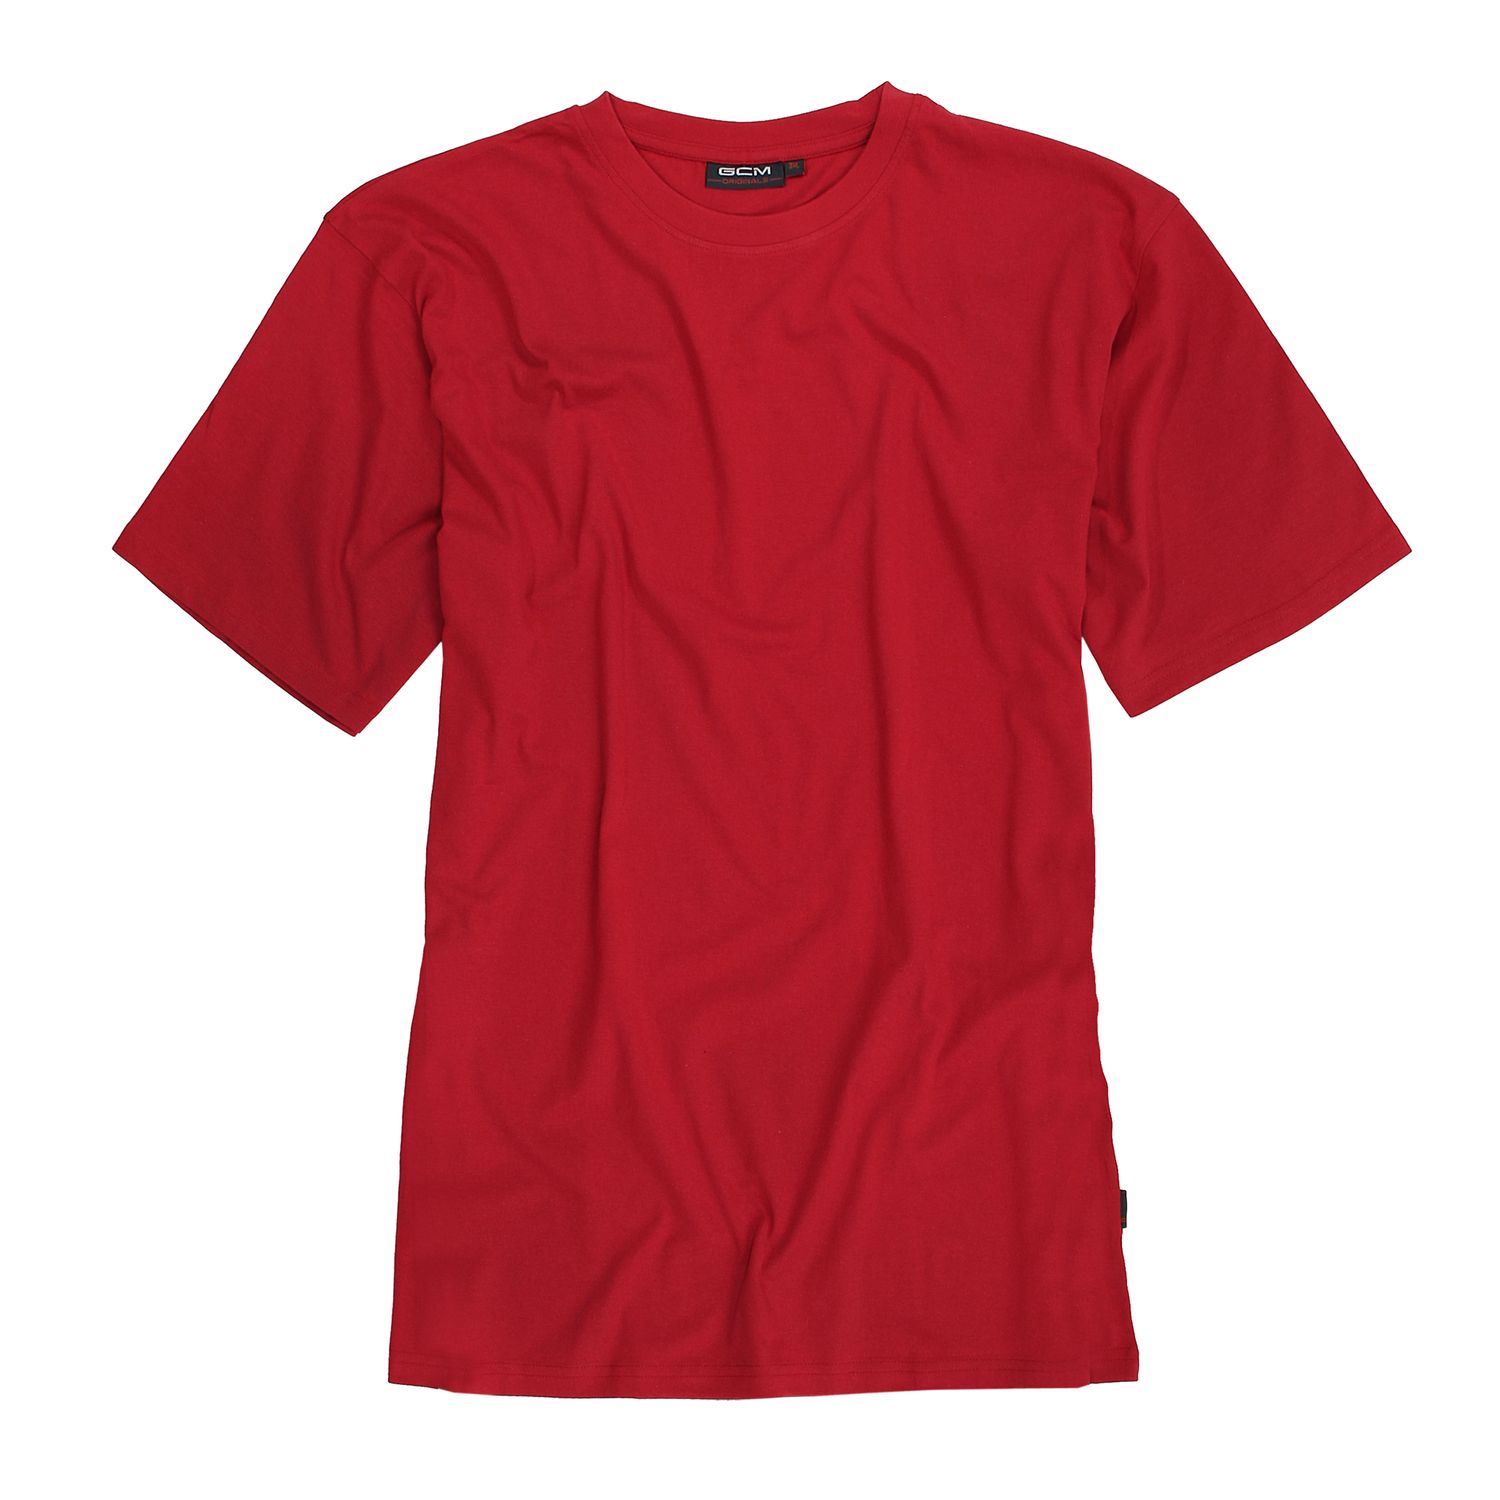 T-shirt in red by GCM Originals in oversizes up to 6XL